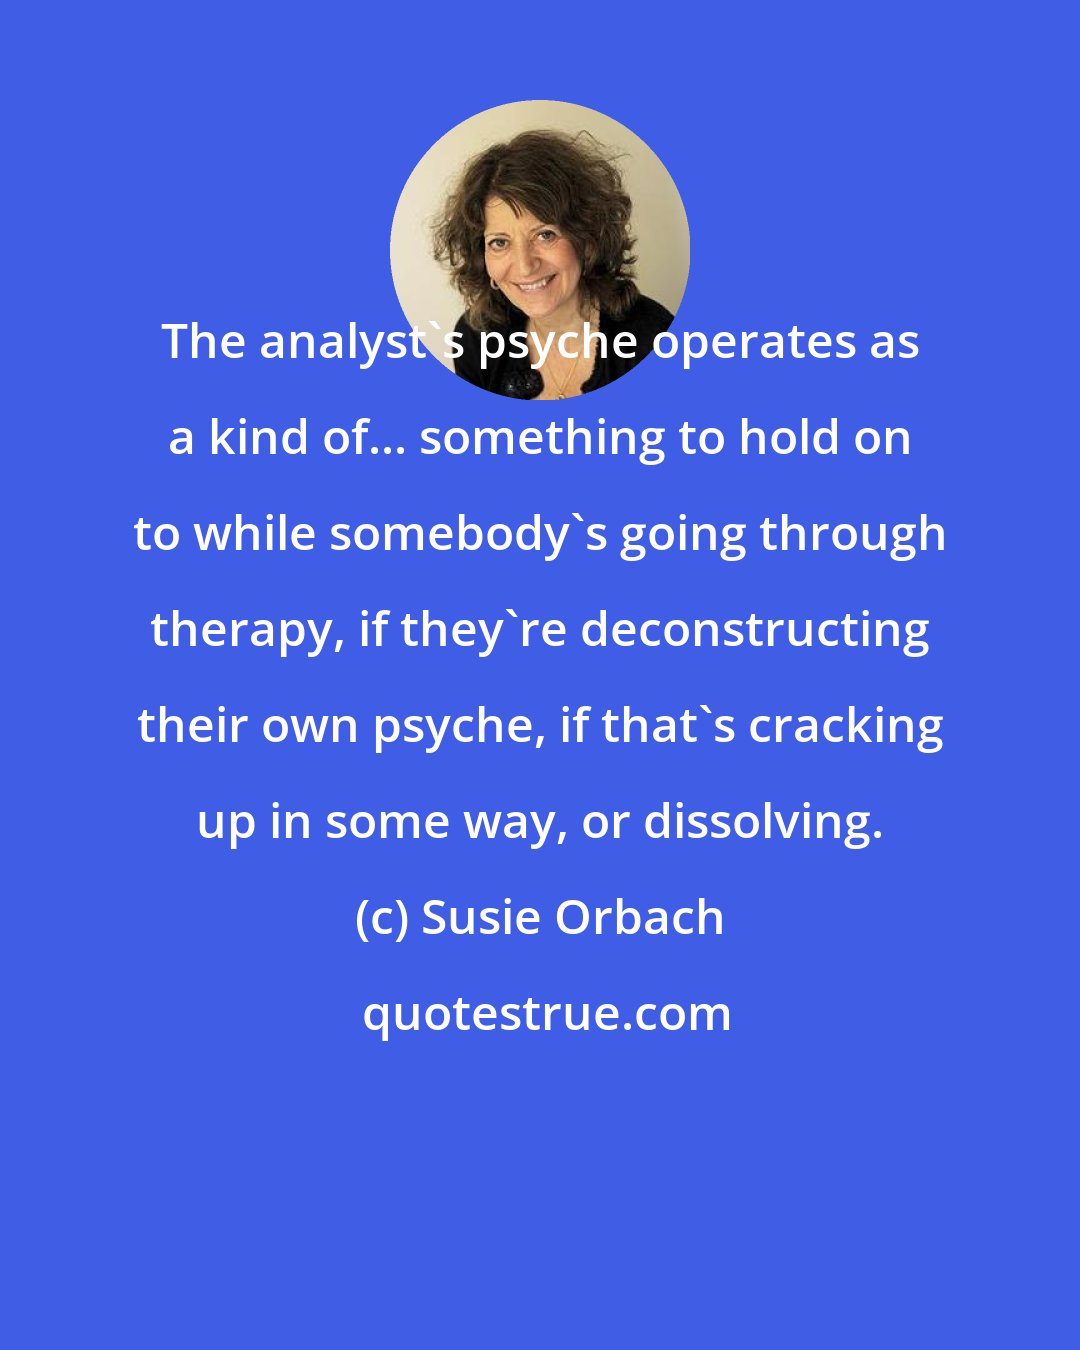 Susie Orbach: The analyst's psyche operates as a kind of... something to hold on to while somebody's going through therapy, if they're deconstructing their own psyche, if that's cracking up in some way, or dissolving.